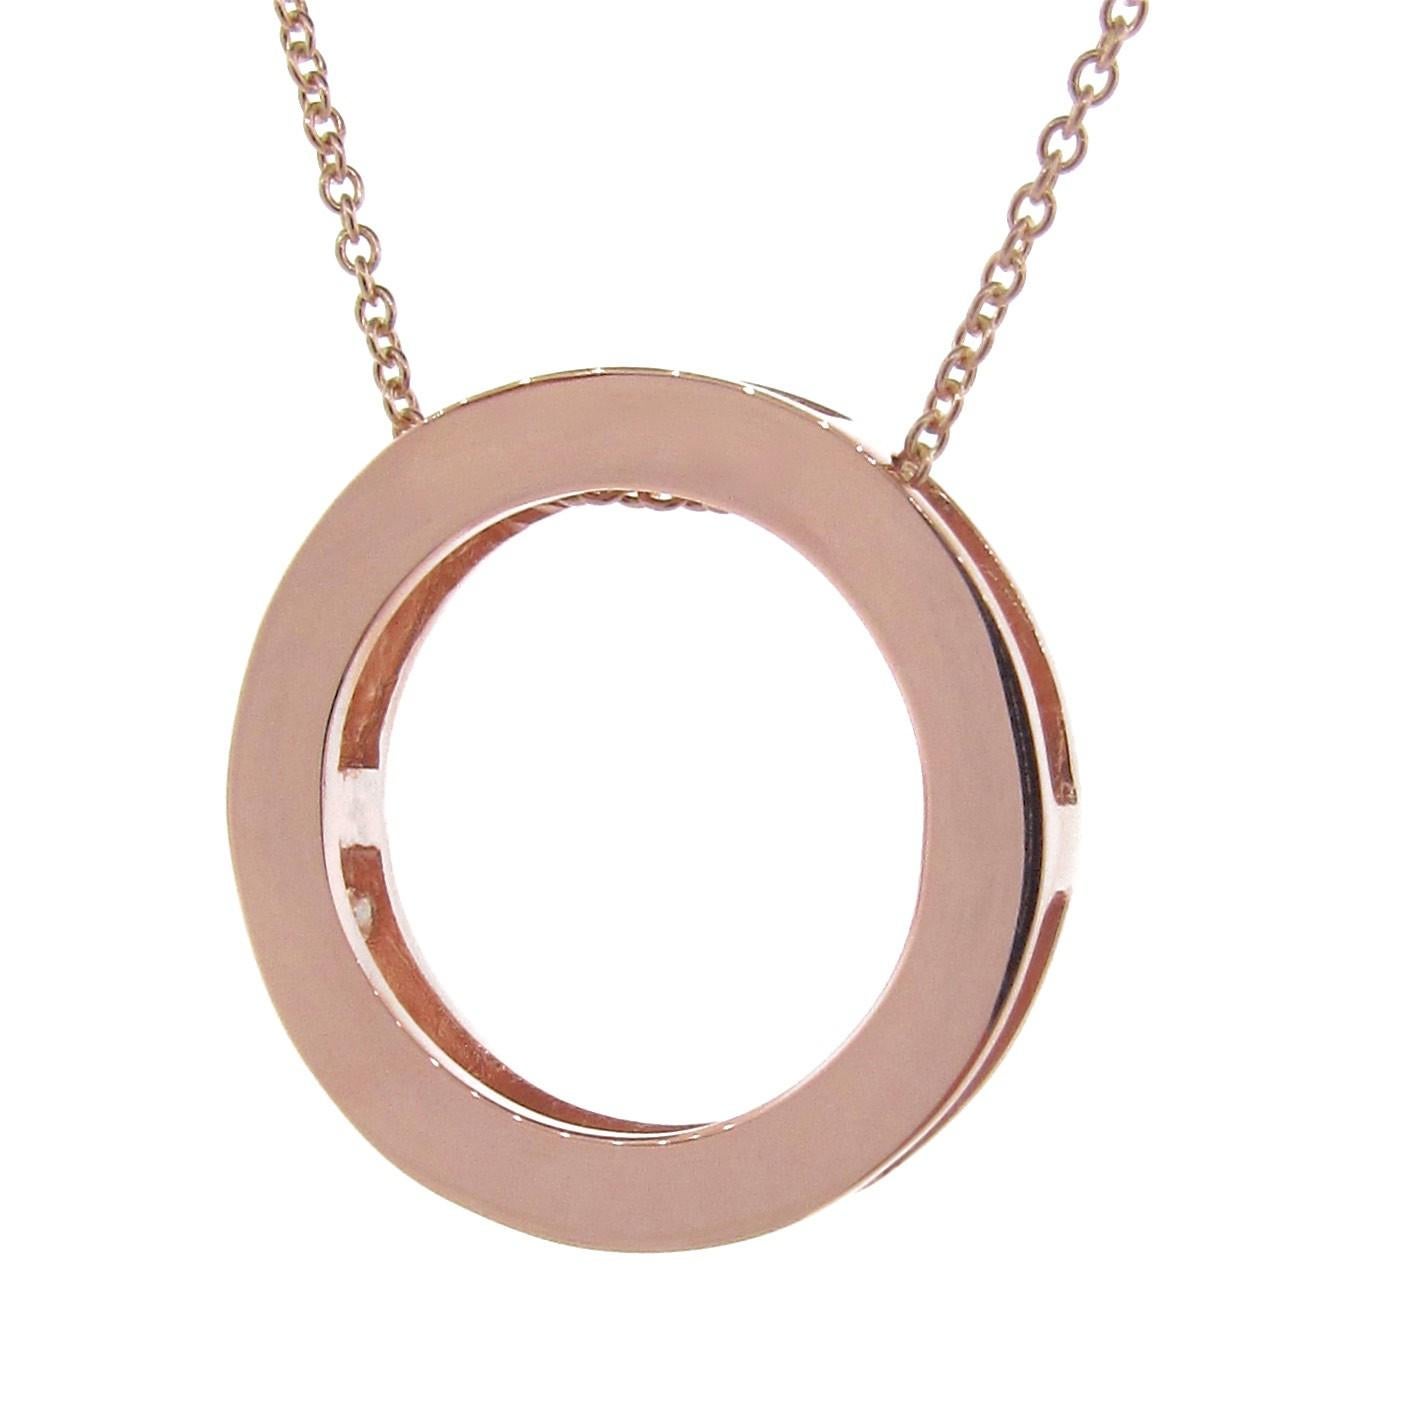 eternity circle necklace meaning